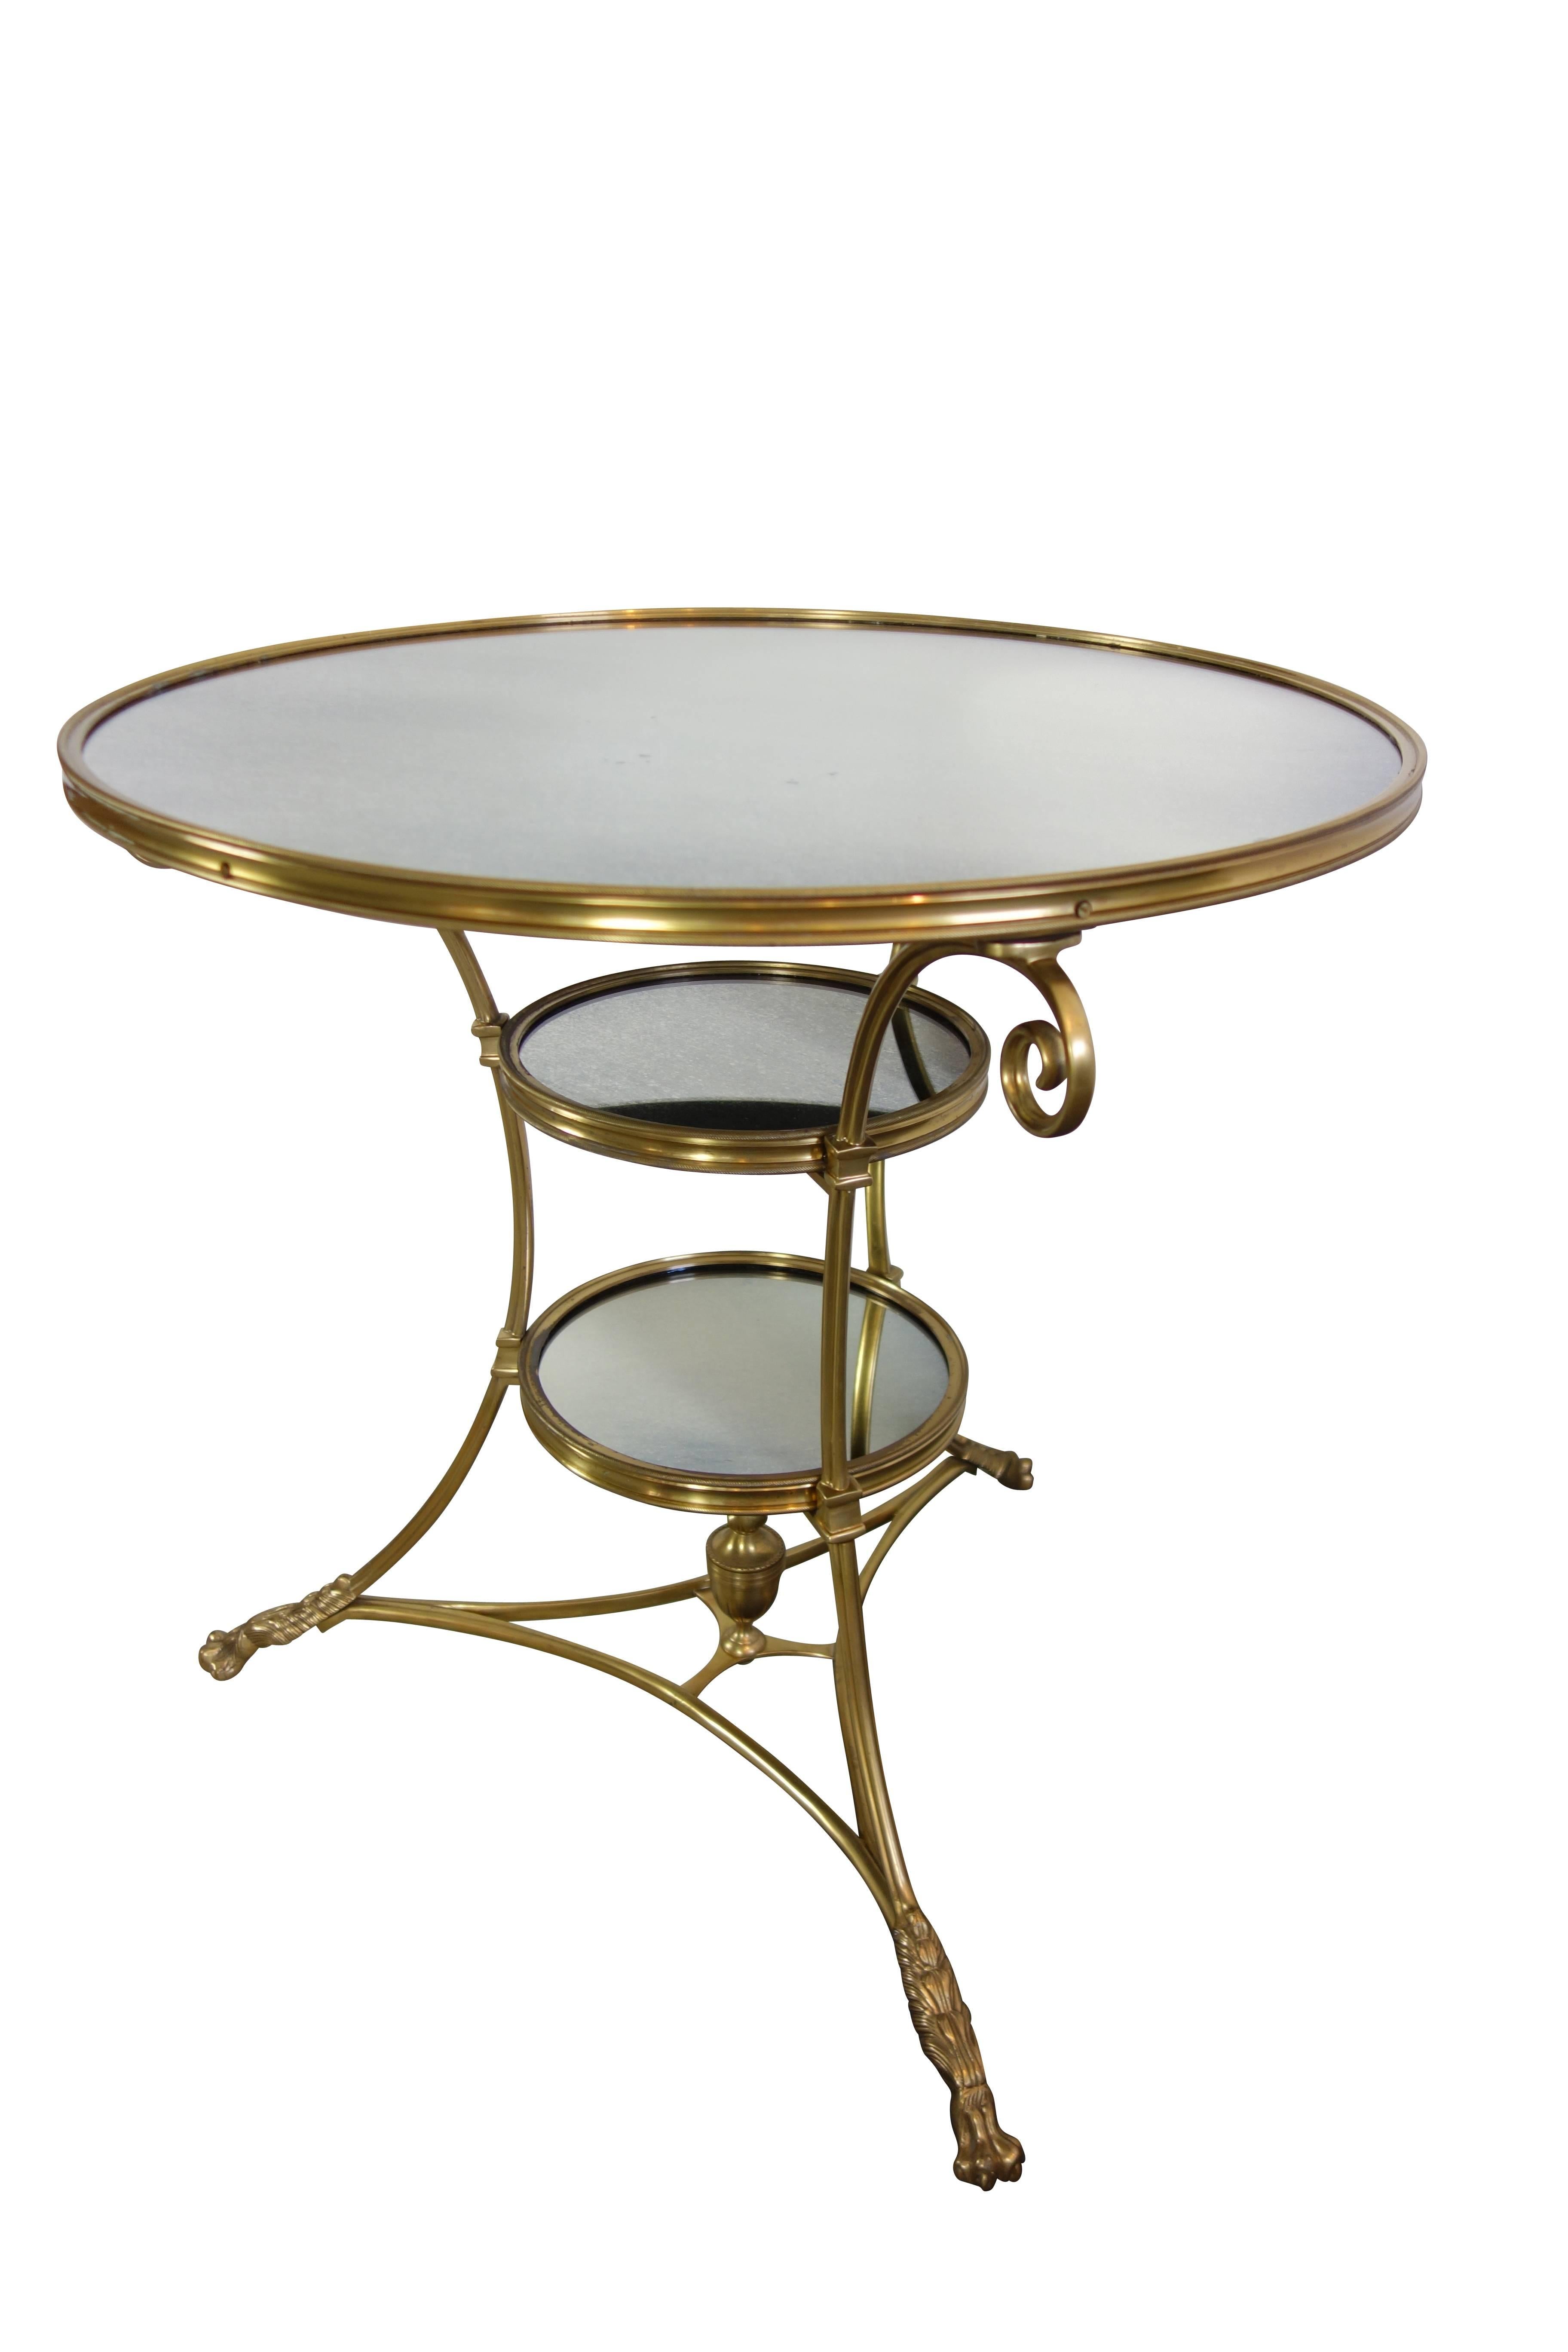 Belgian Mirrored Brass Bistro Table from Bruges, Belgium, circa 1970